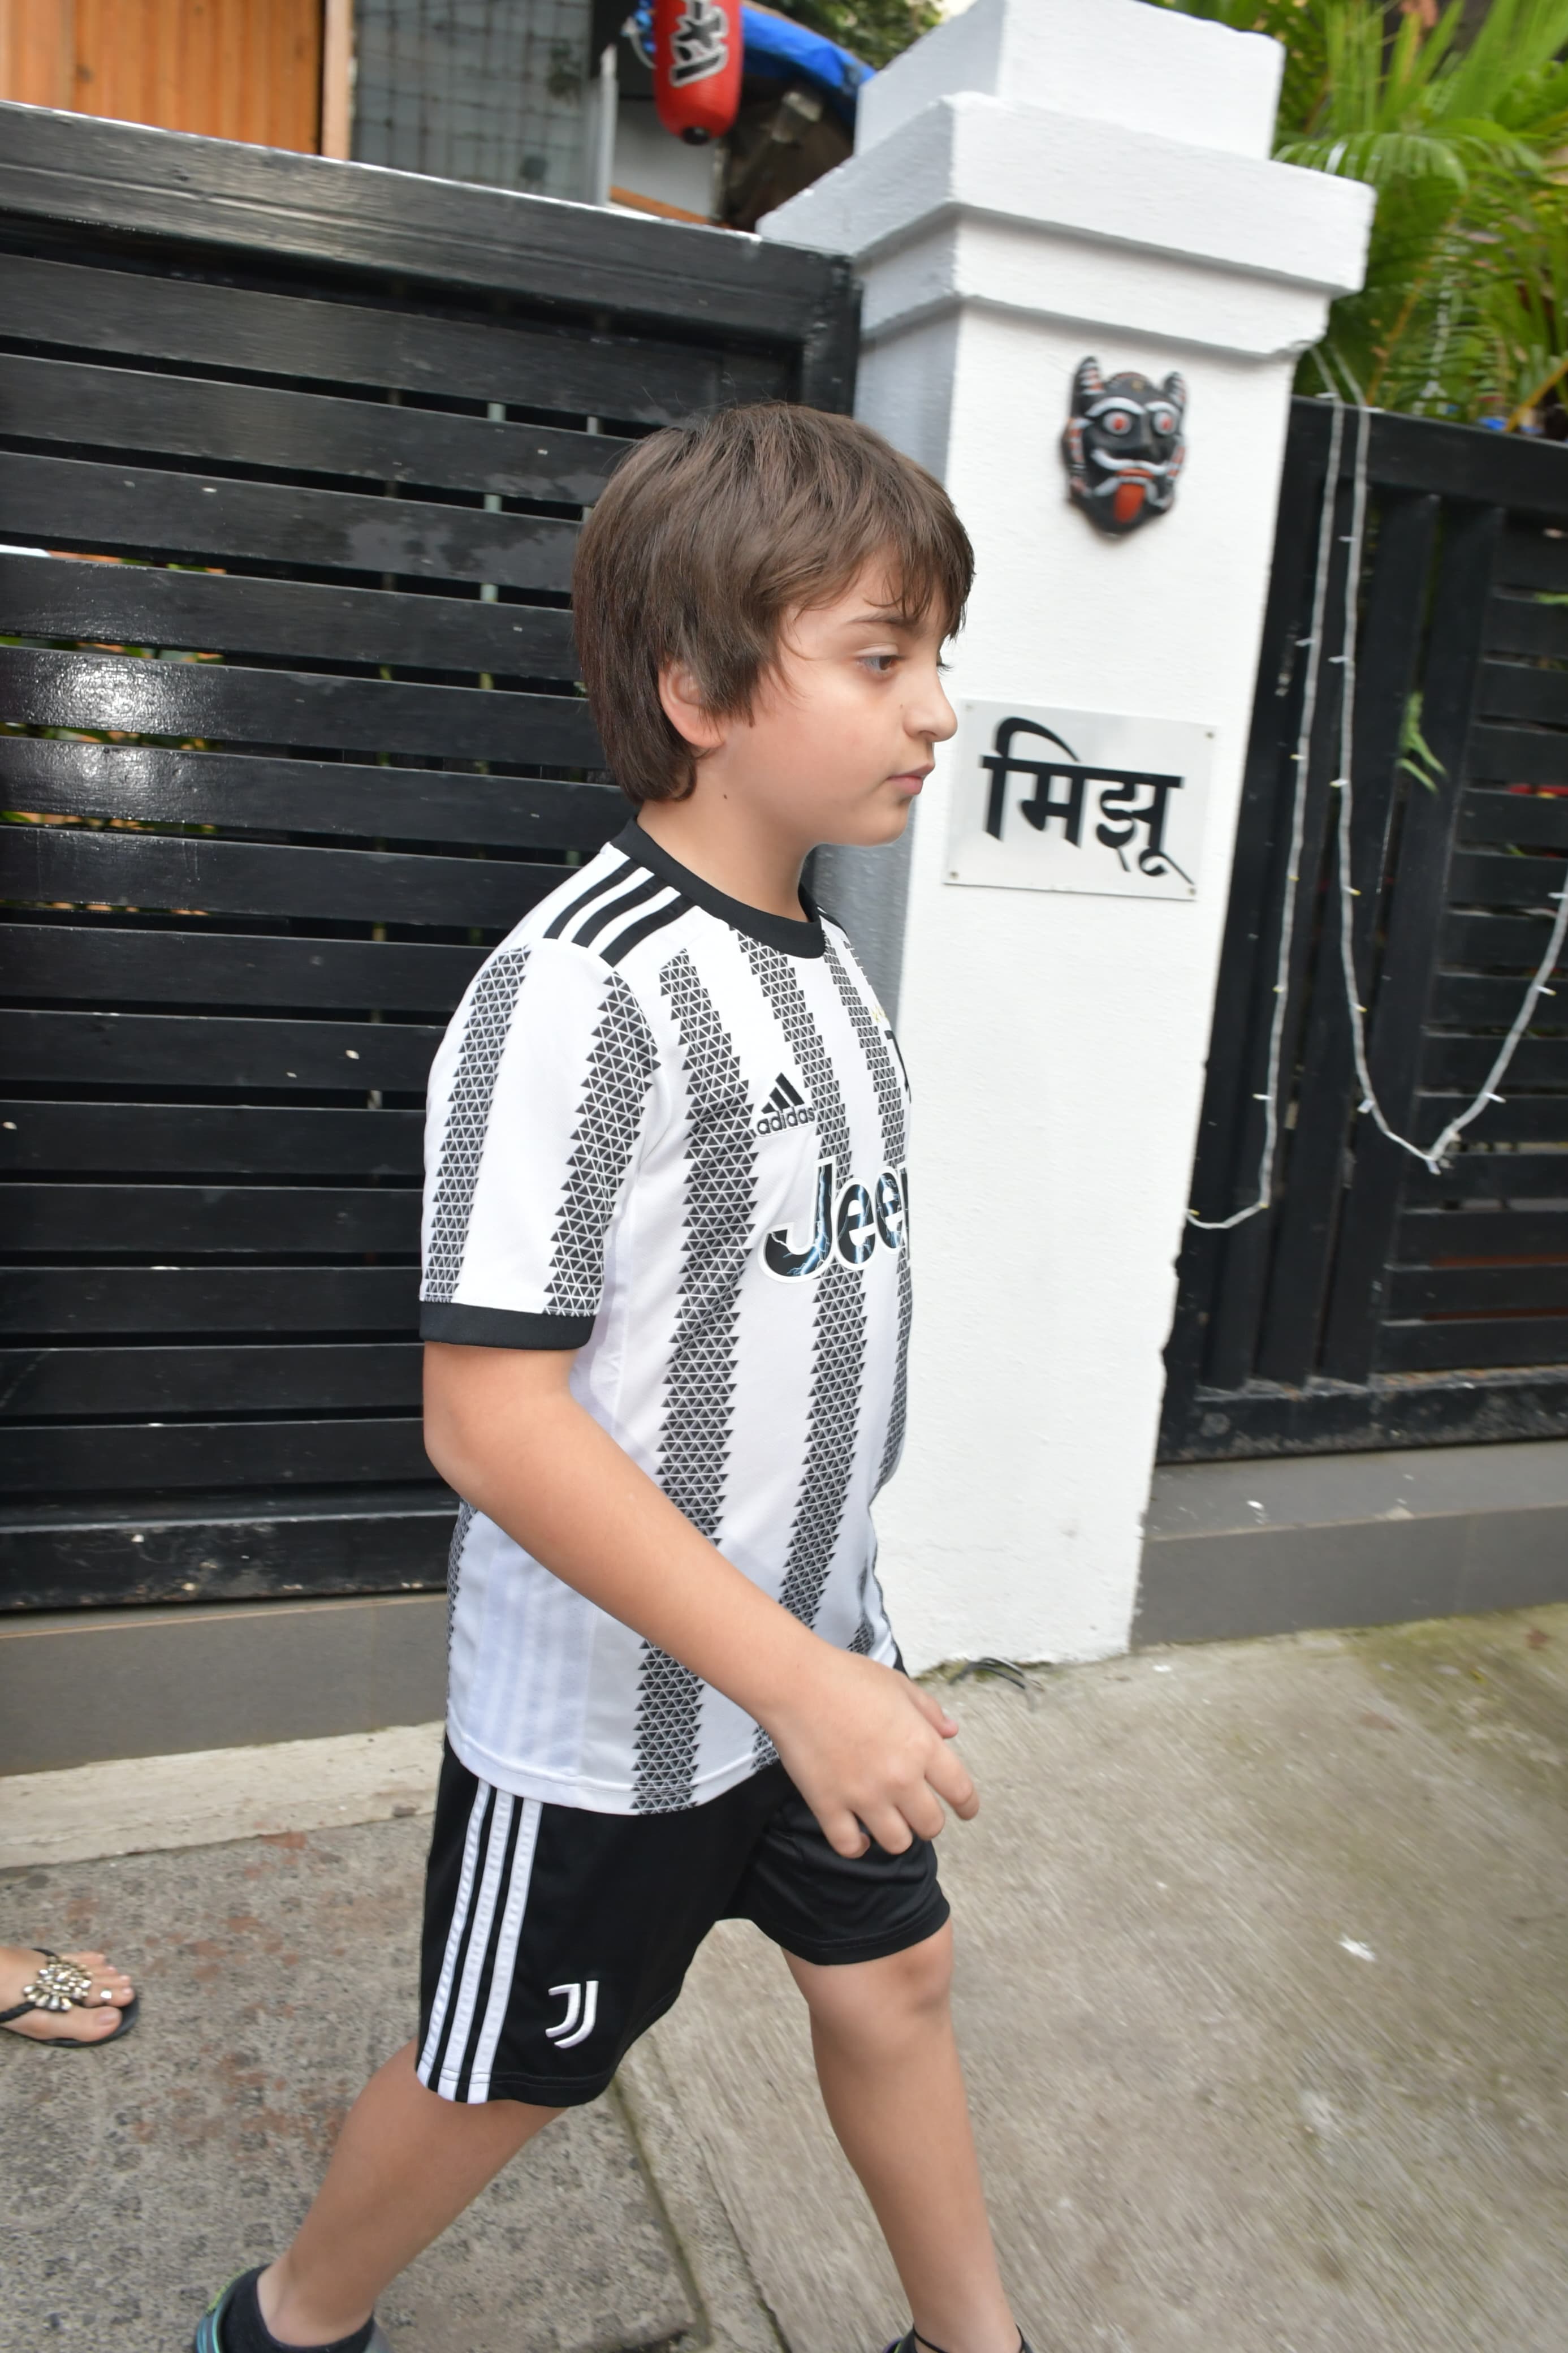 AbRam was spotted in the city as he went out and about in the city